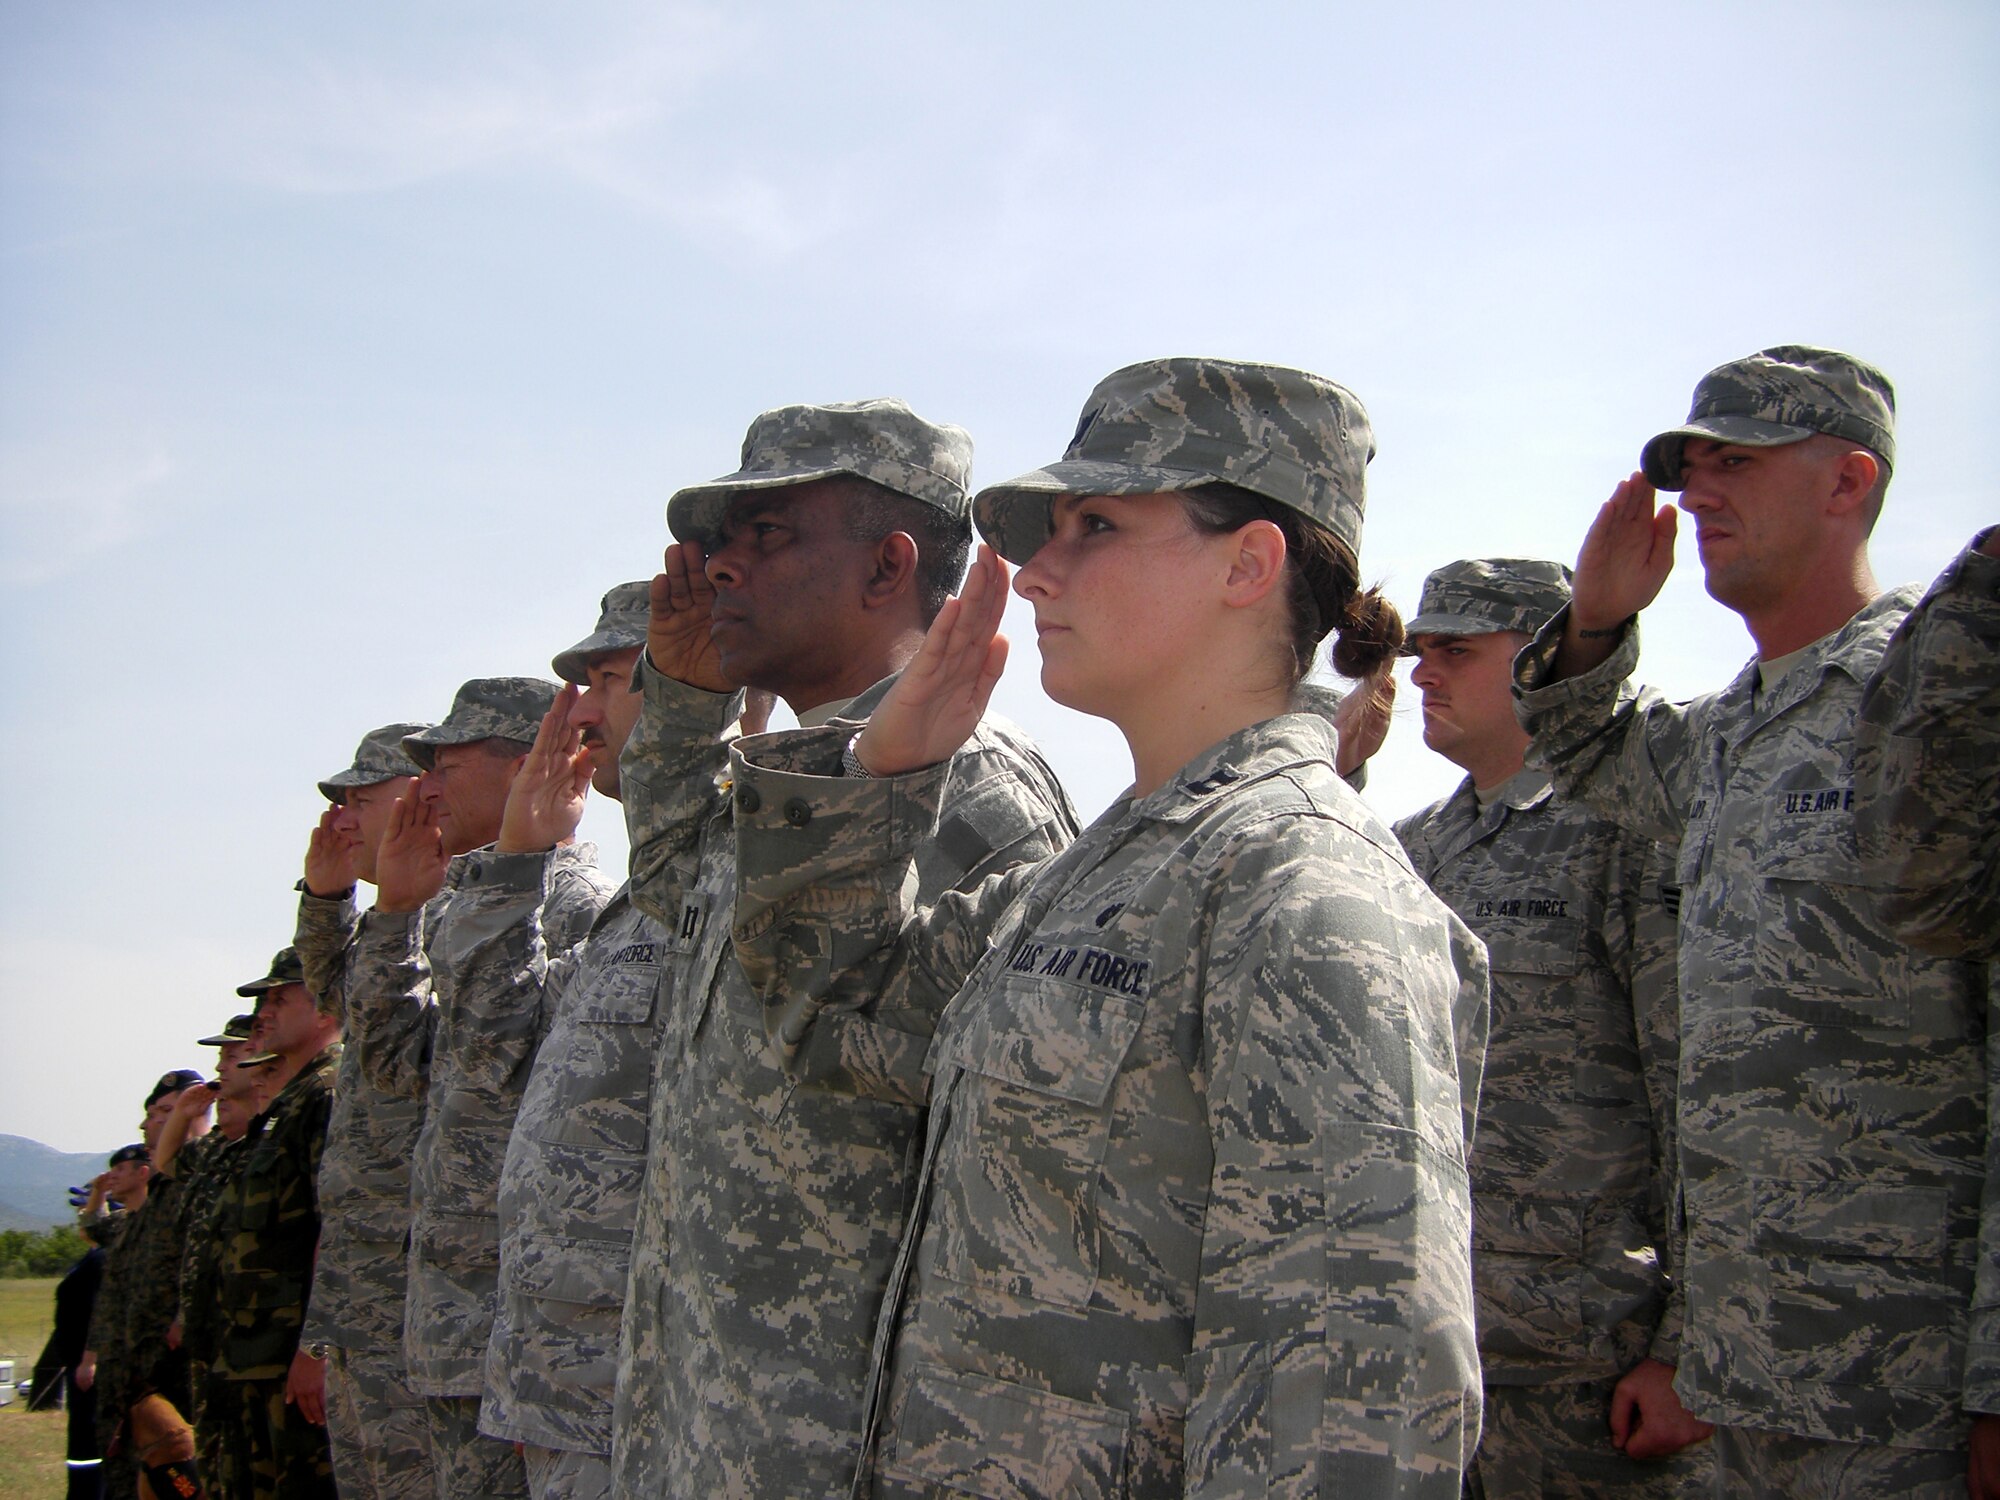 CAMP PEPELISHTE, Macedonia – Members of the United States Air Force and Army salute during the Macedonian and American National Anthems at the opening ceremony of Medical Training Exercise in Central and Eastern Europe 2011 here June 6.  The countries participating in this year’s MEDCEUR are Macedonia, Montenegro, Bosnia and Herzegovina, Serbia, Slovenia, Norway and the United States.  MEDCEUR is a Partnership for Peace and Chairman of the Joint Chiefs of Staff-sponsored regional and multilateral exercise in Central and Eastern Europe designed to provide medical training and operational experience in a deployed environment.  (U.S. Air Force photo/Master Sgt. Kelley J. Stewart)